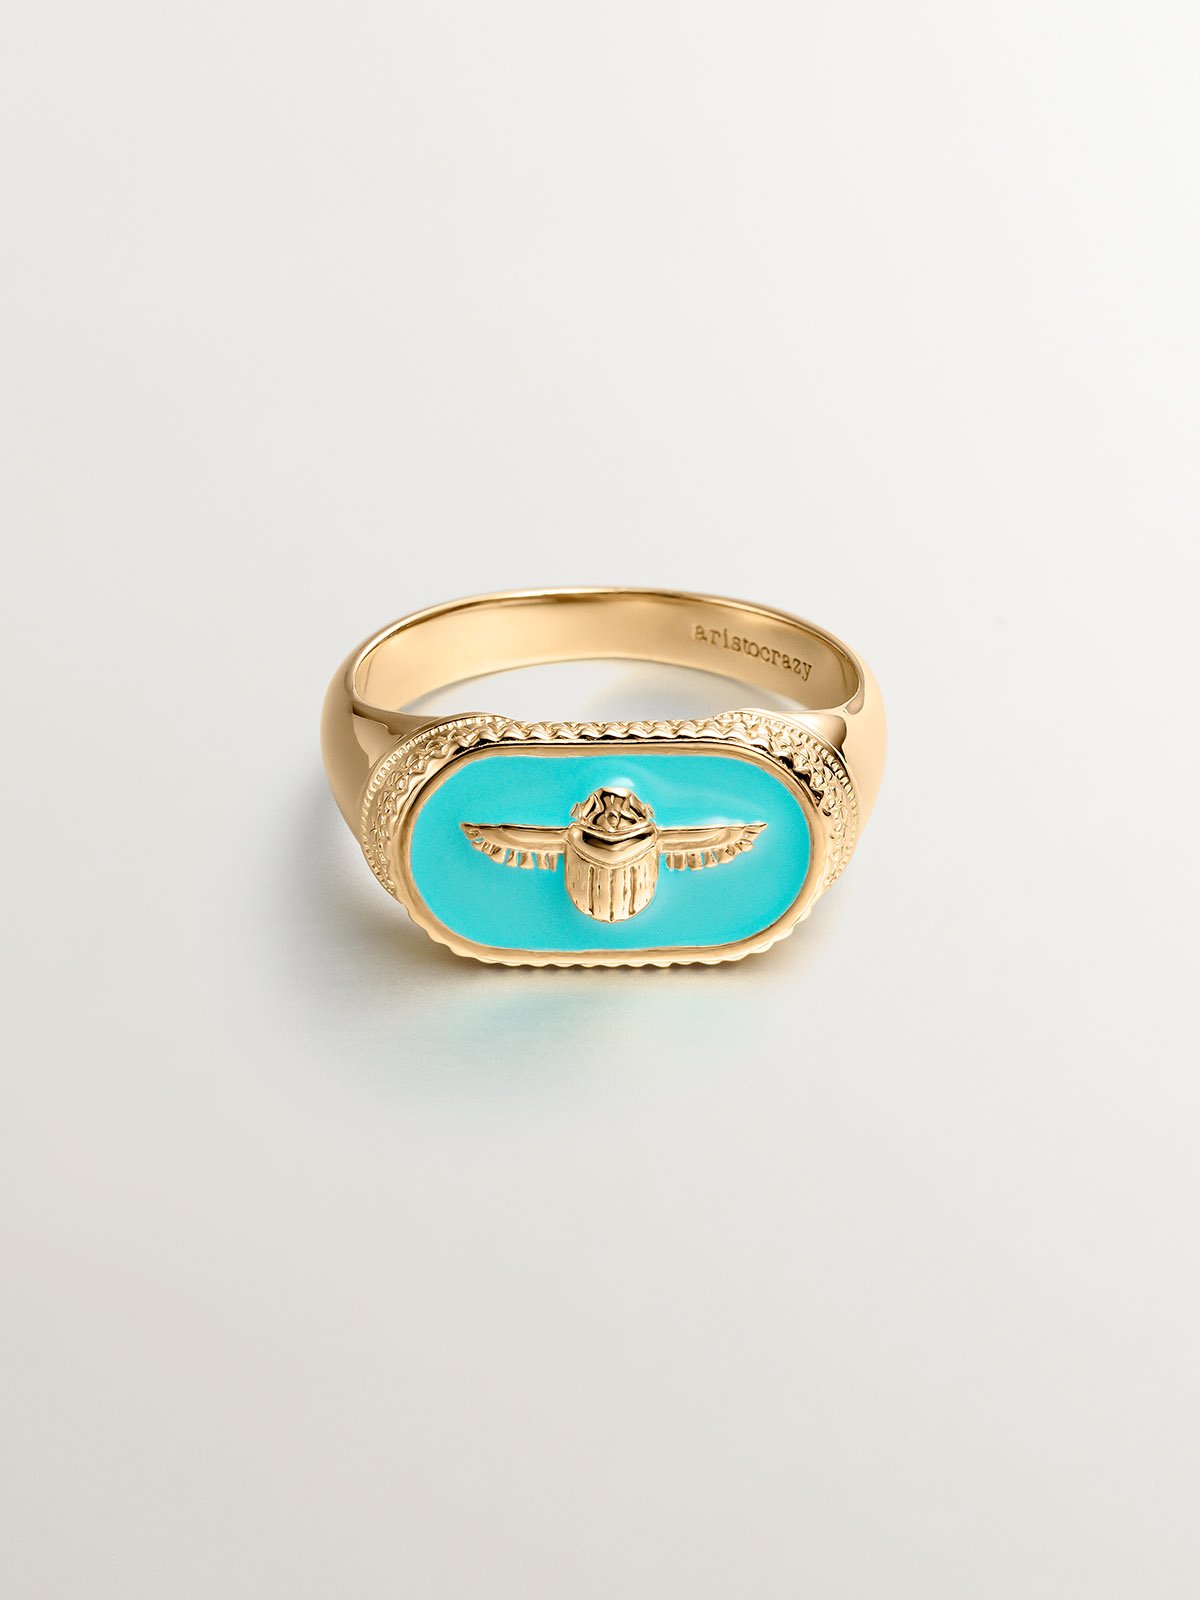 925 Silver signet ring gilded in 18K yellow gold with beetle and turquoise enamel